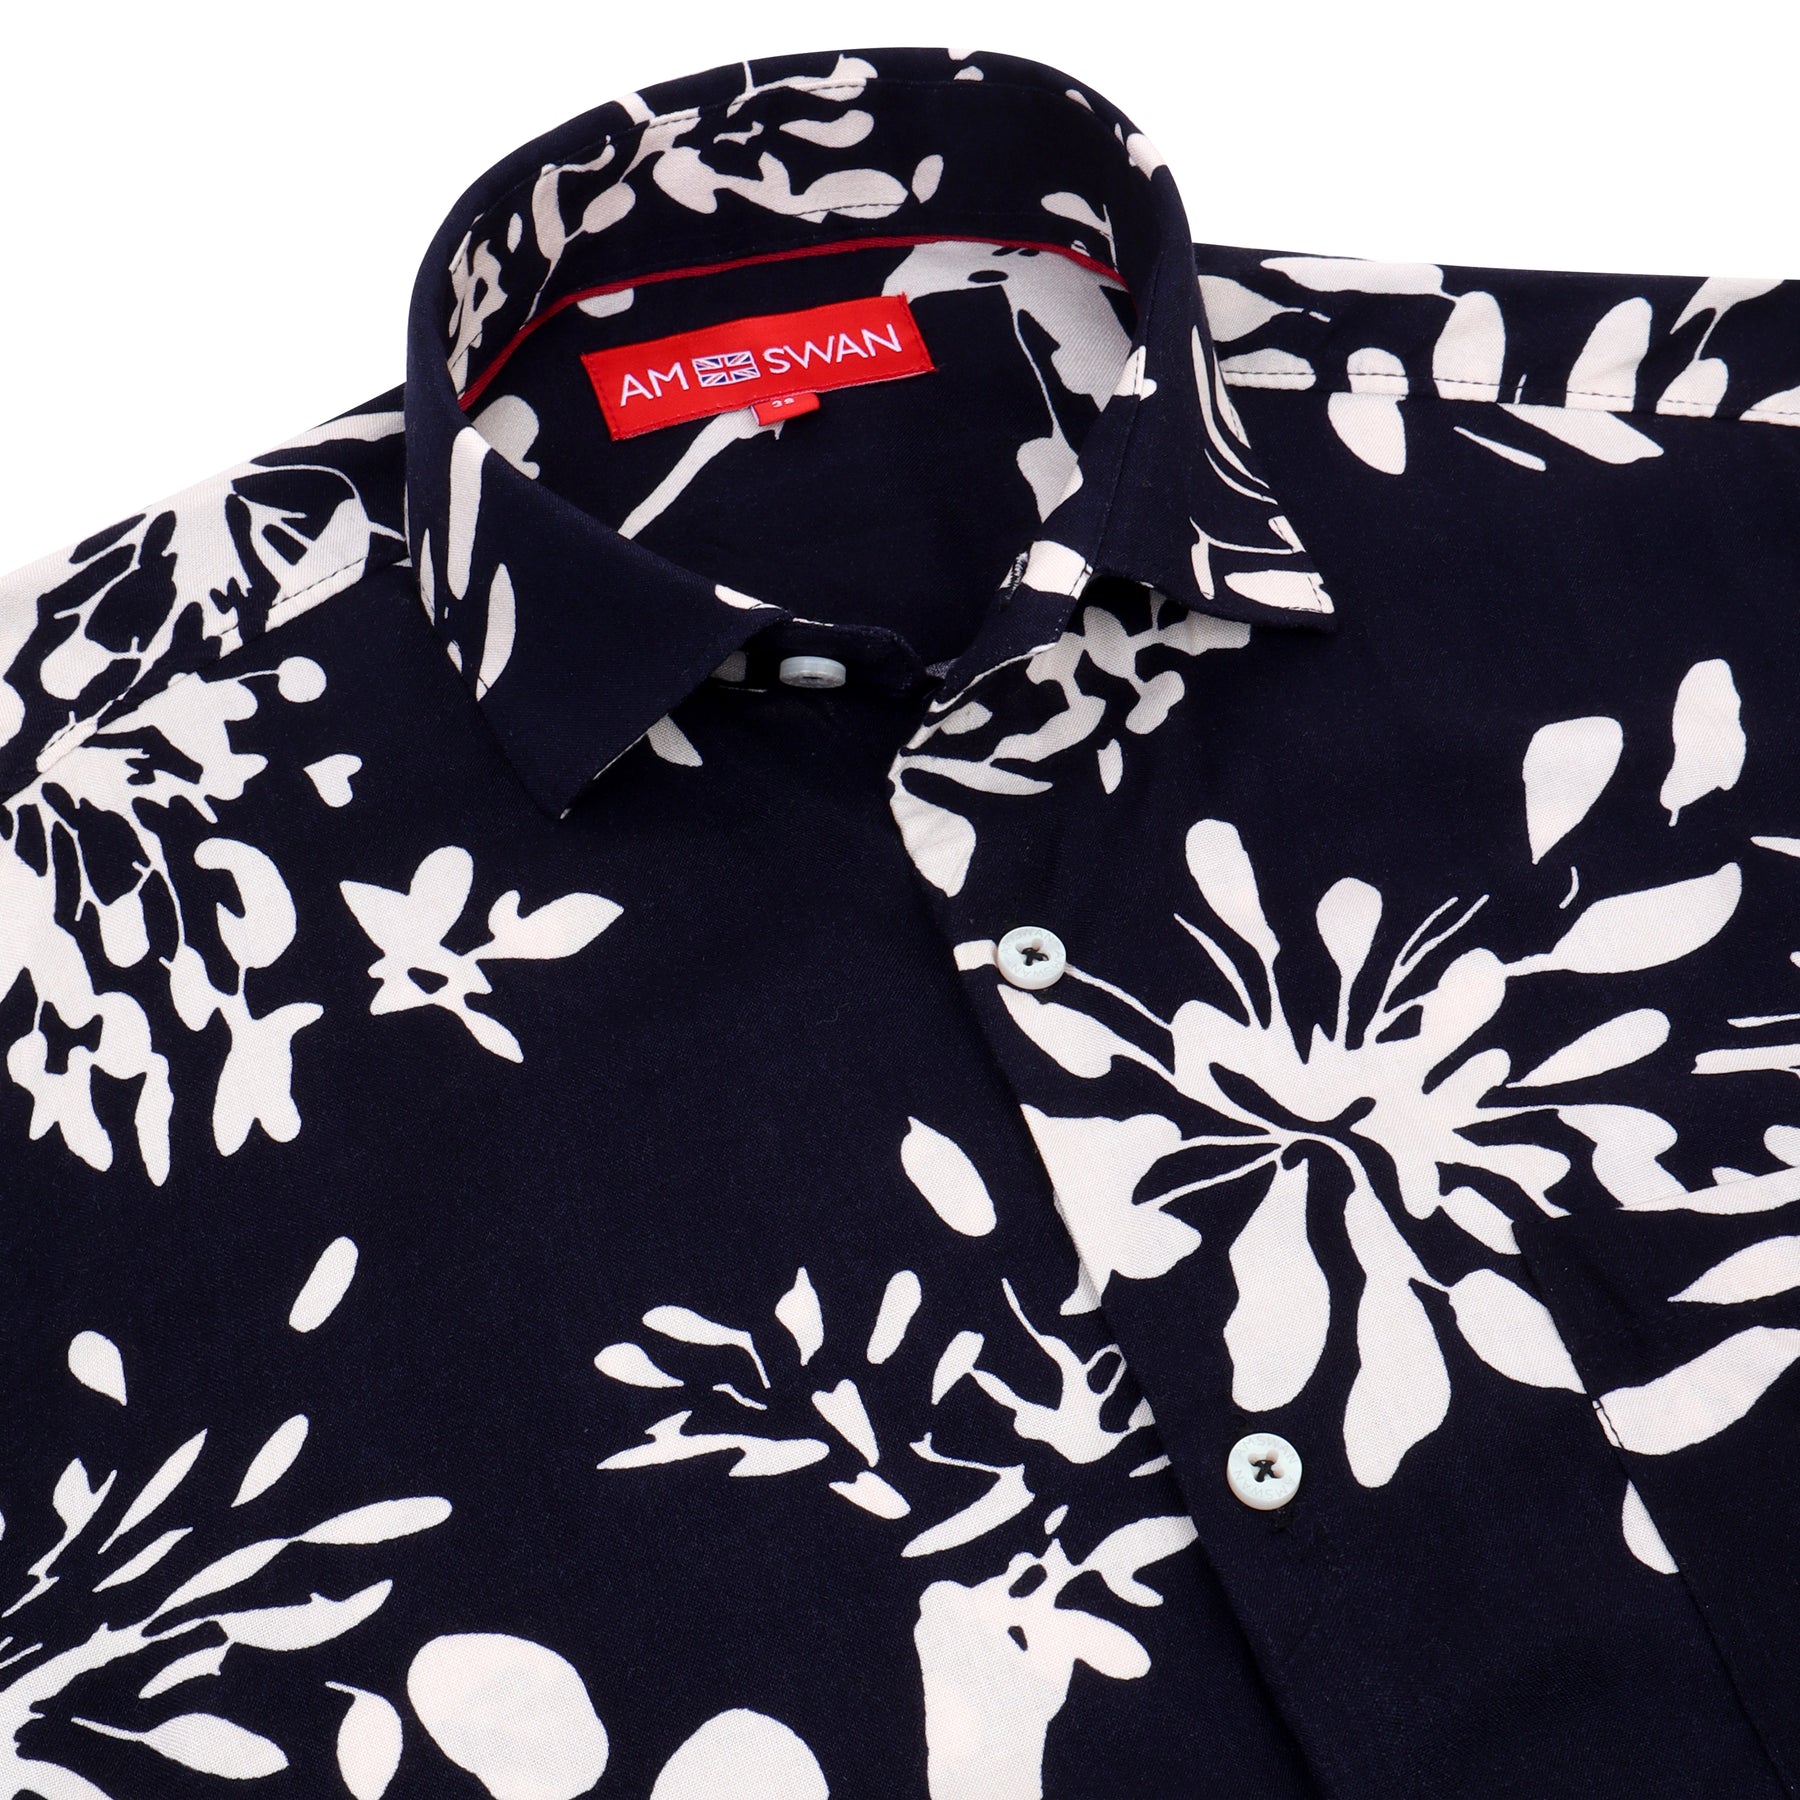 AMSWAN MEN'S PREMIUM RAYON SHIRT WITH NAVY FLORAL PRINT